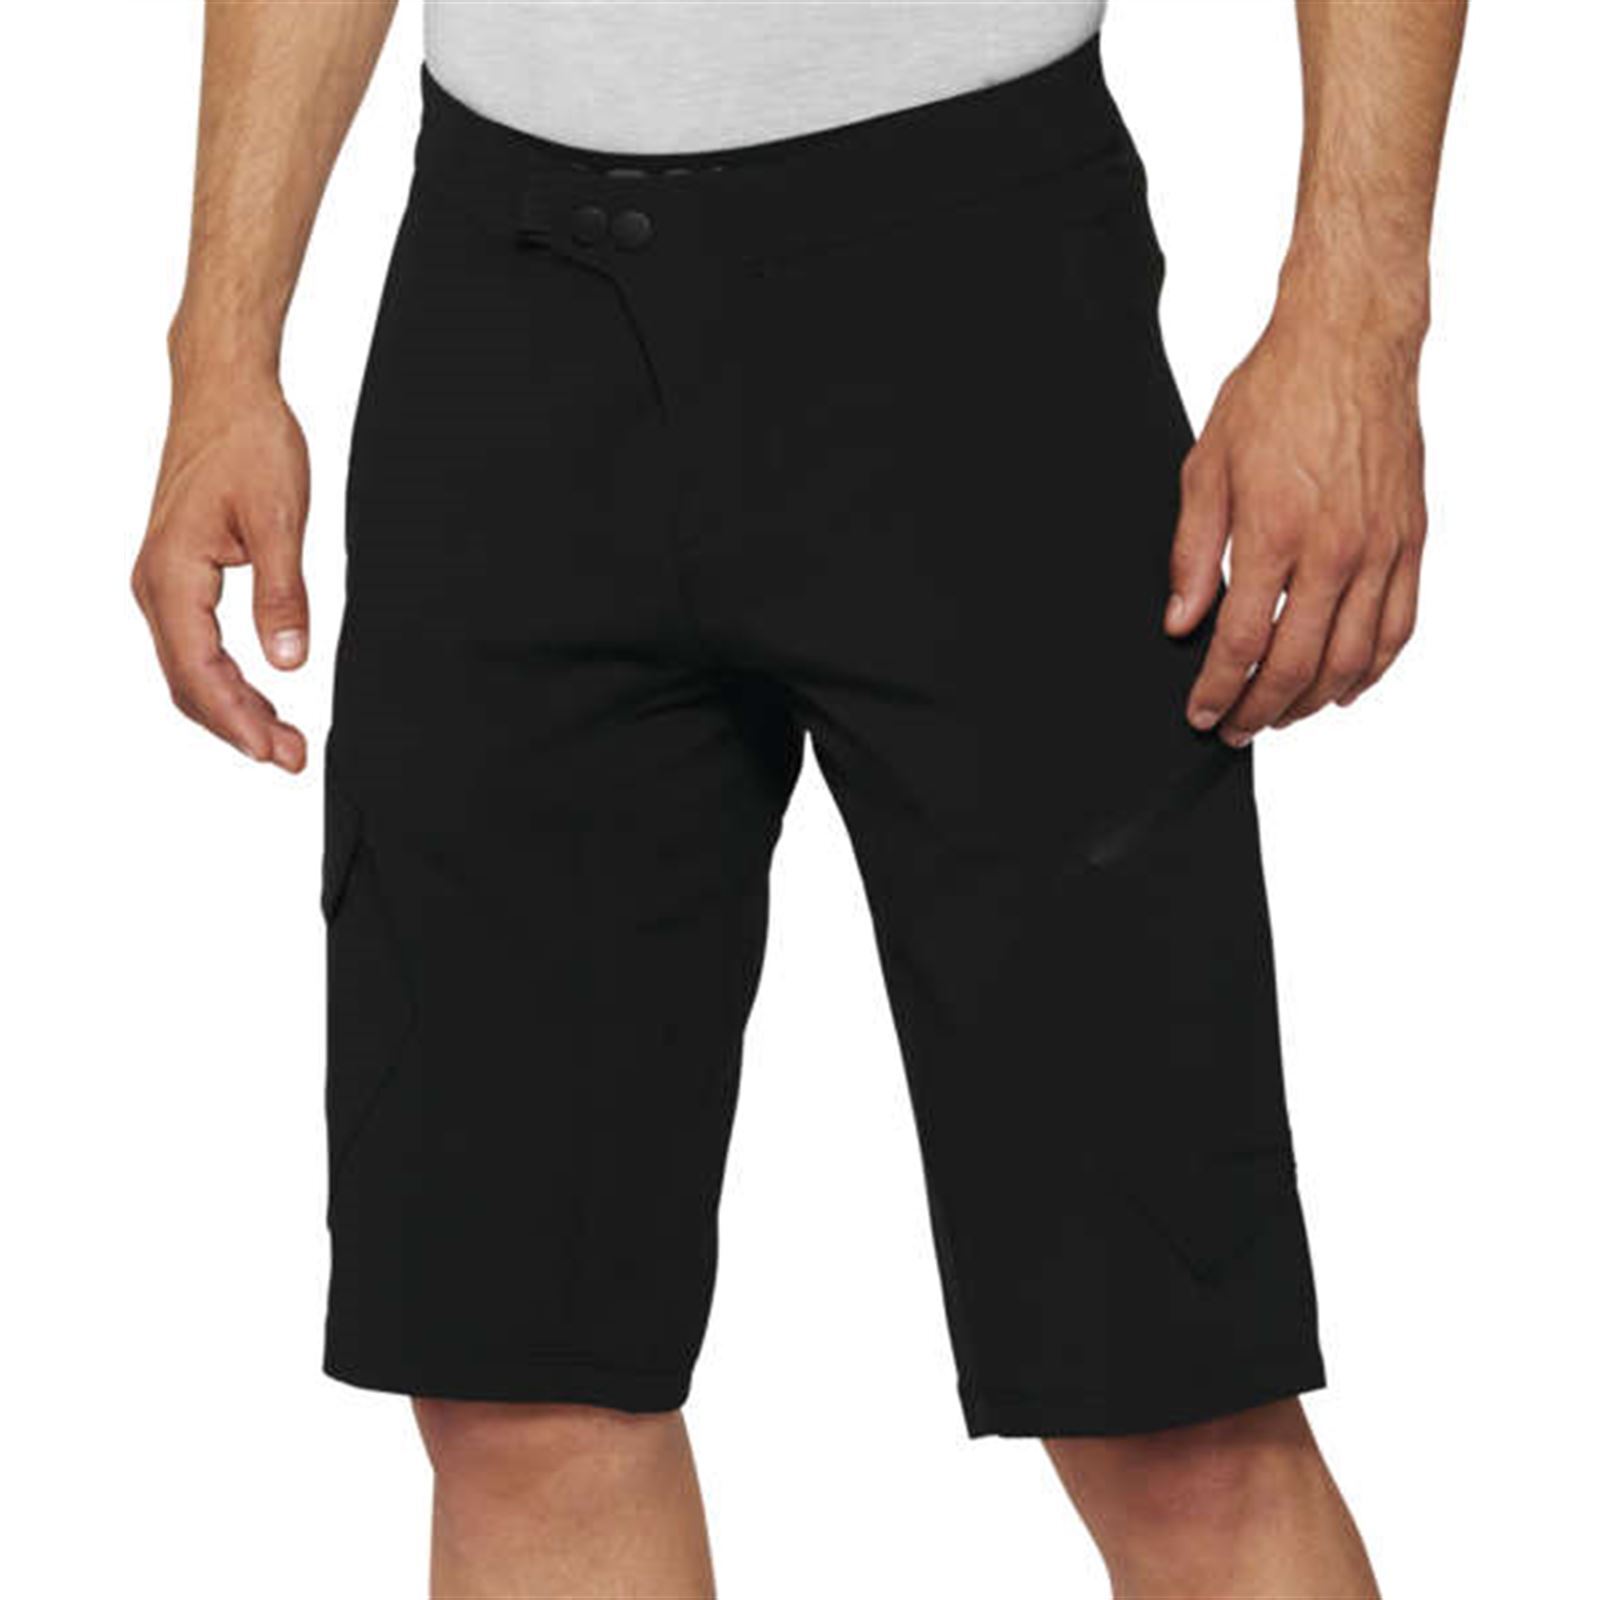 100% Ridcmp Shorts W/ Liner Blk 38 - Click Image to Close